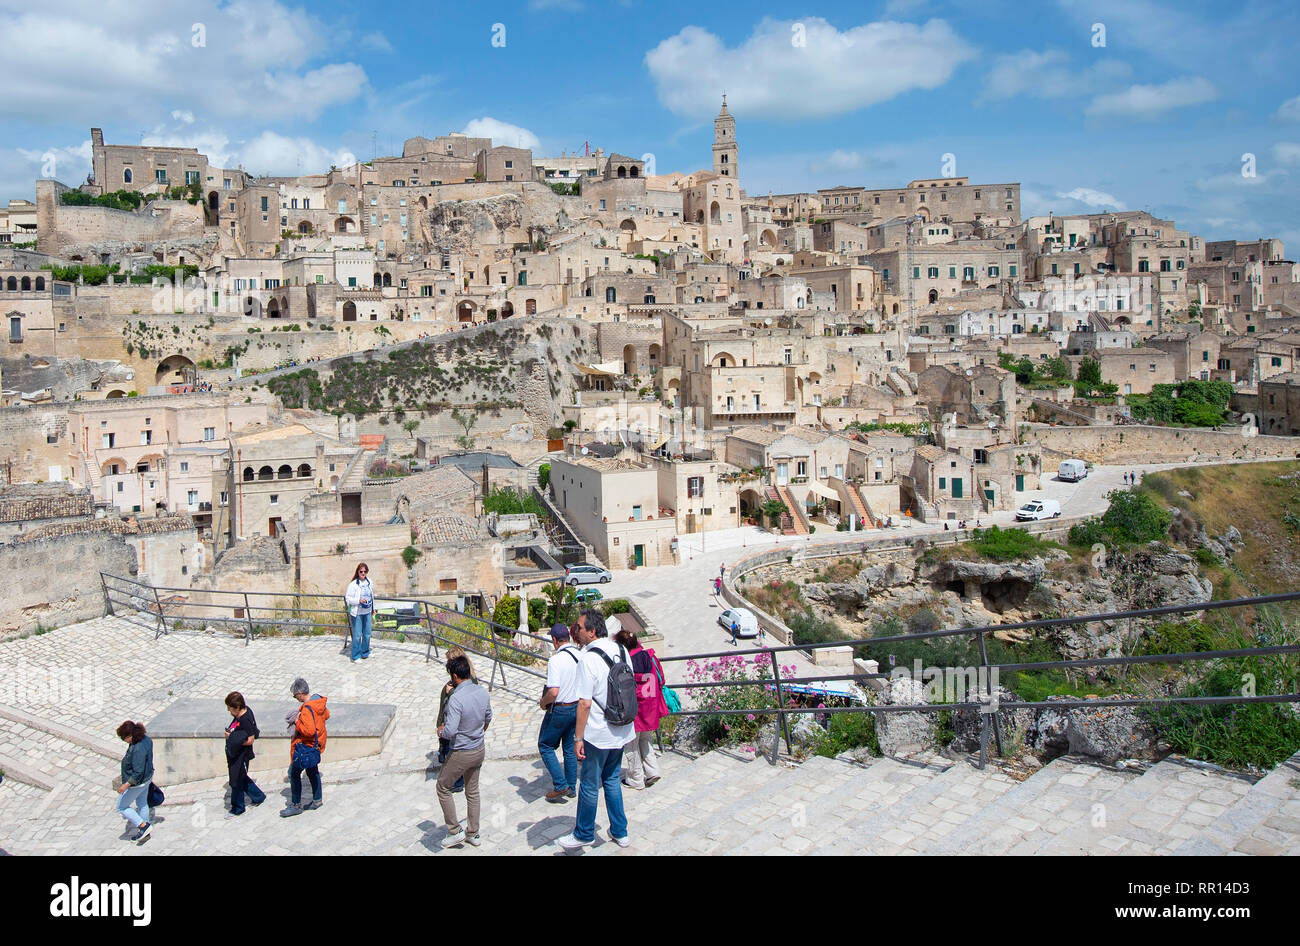 View on the Sasso Caveoso, Medieval old town, Sassi di Matera, Capital of Culture 2019, Matera, province of Basilicata, Italy Stock Photo